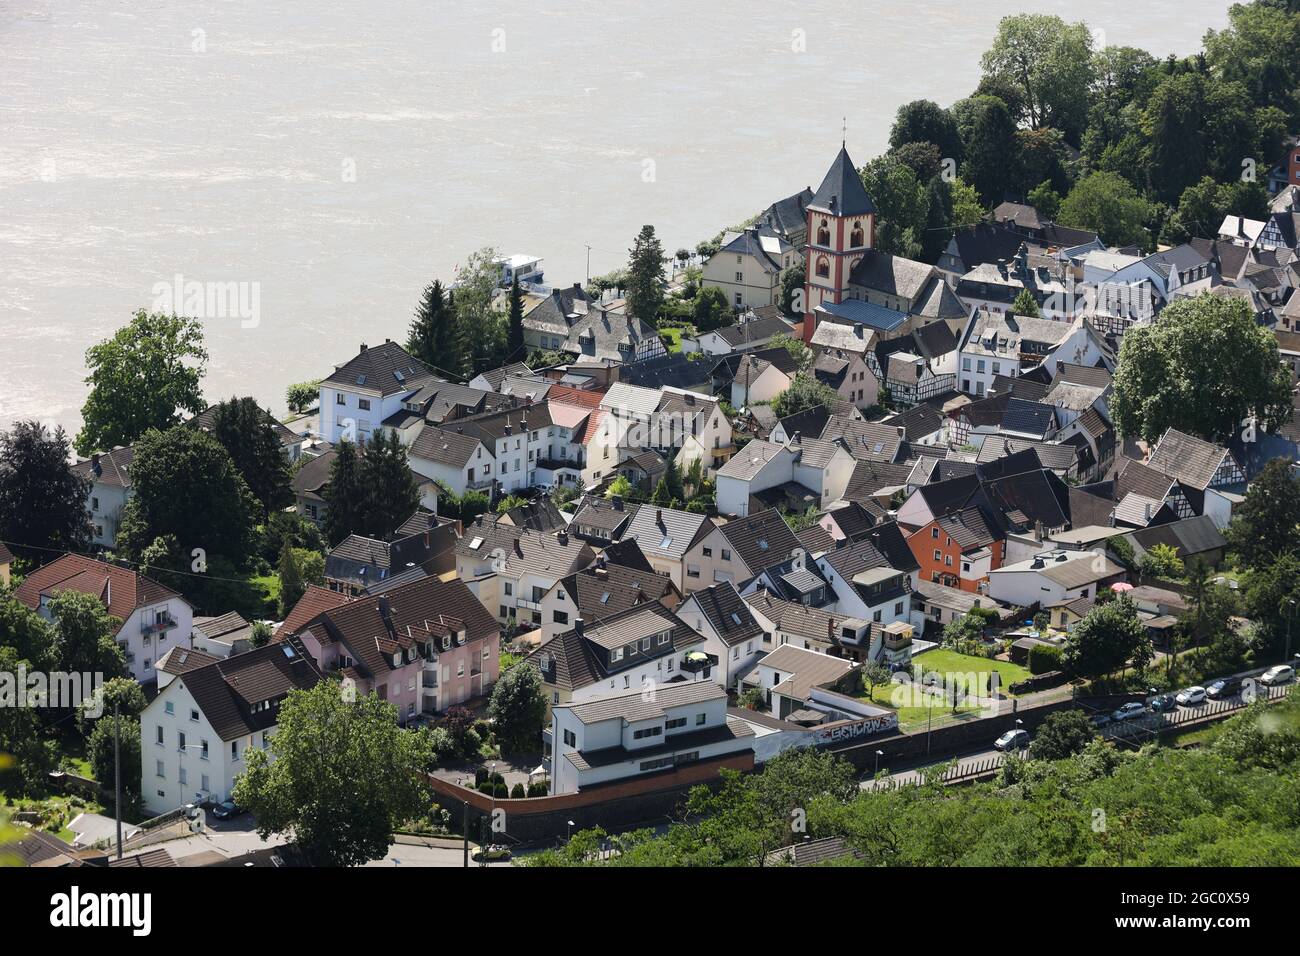 View from the plateau of Erpeler Ley to Erpel with the church Sankt Severin am Rhein, Rhineland-Palatinate, Germany. Stock Photo